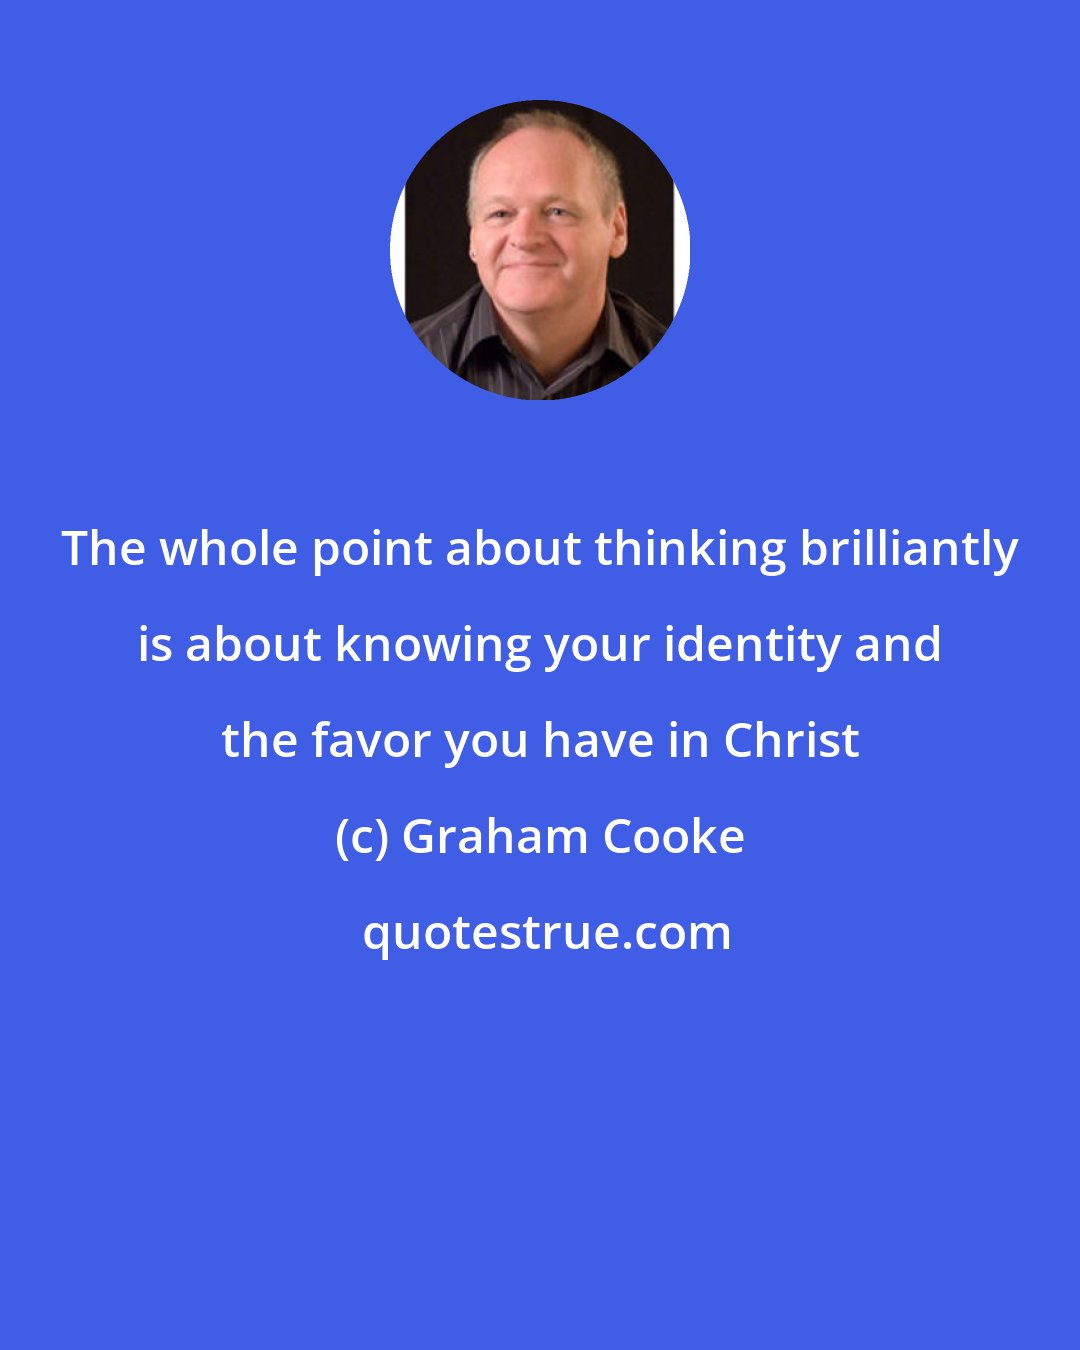 Graham Cooke: The whole point about thinking brilliantly is about knowing your identity and the favor you have in Christ